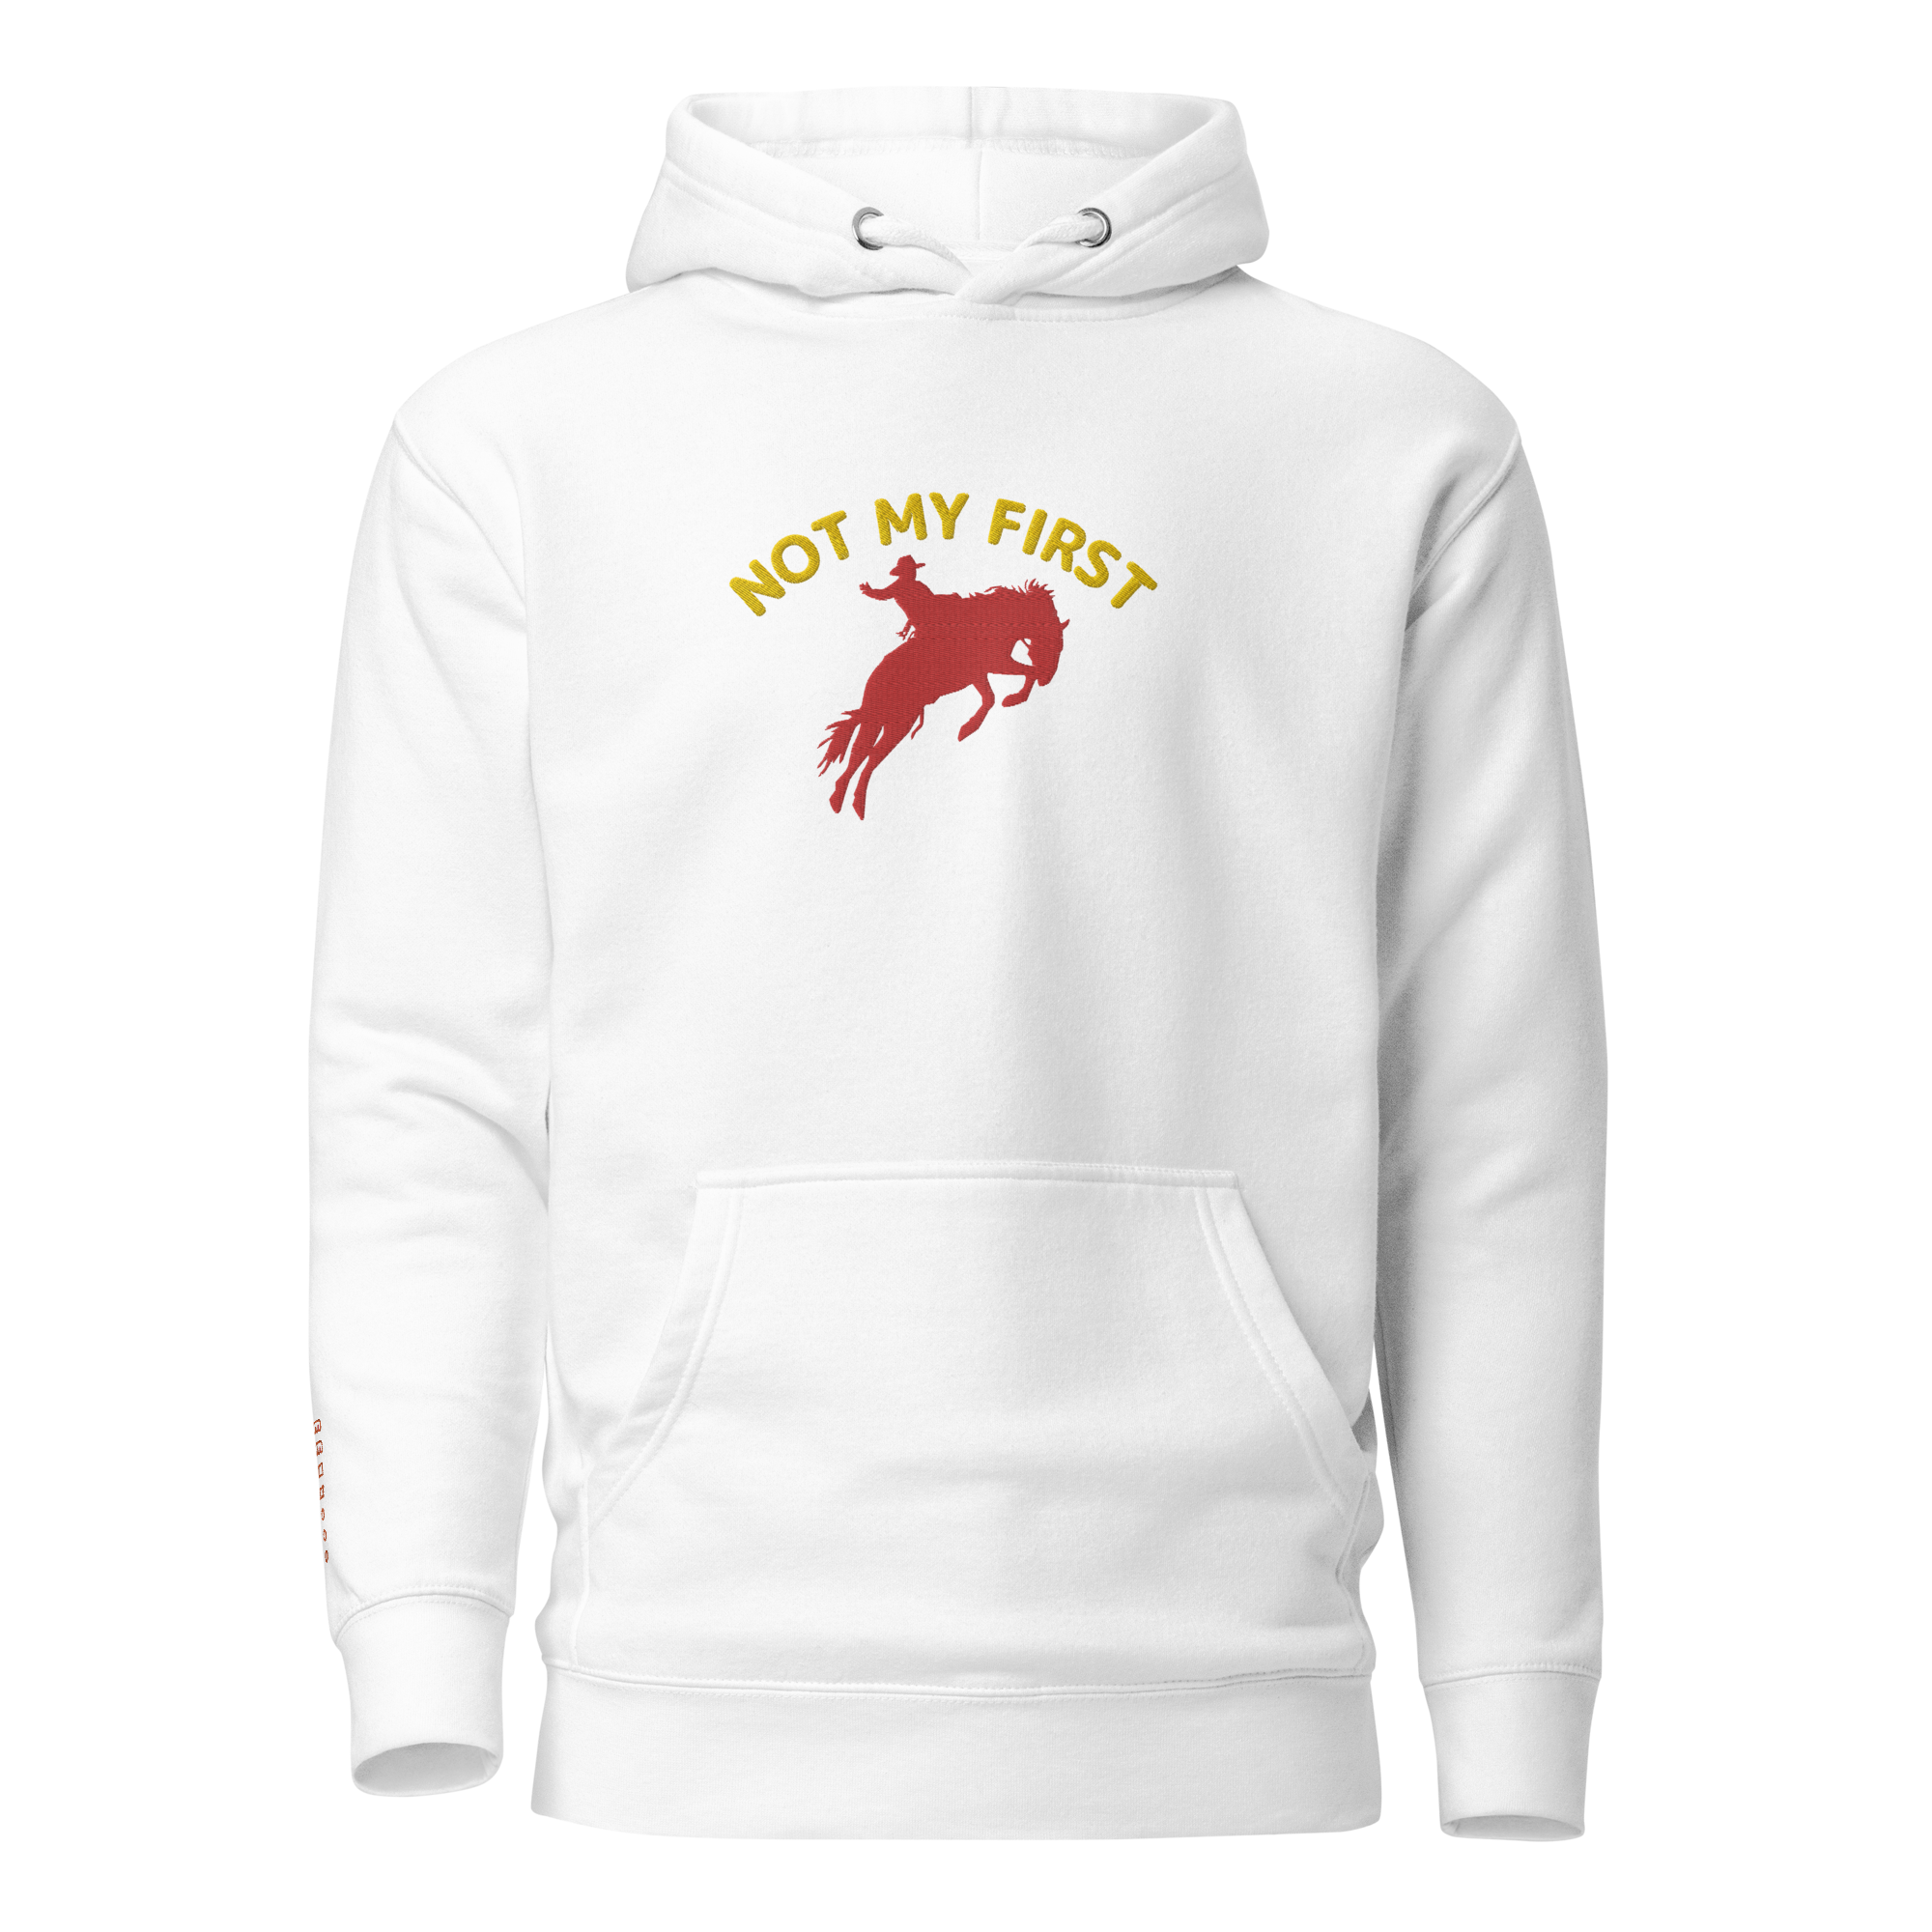 My First Rodeo Embroidered Unisex Hoodie